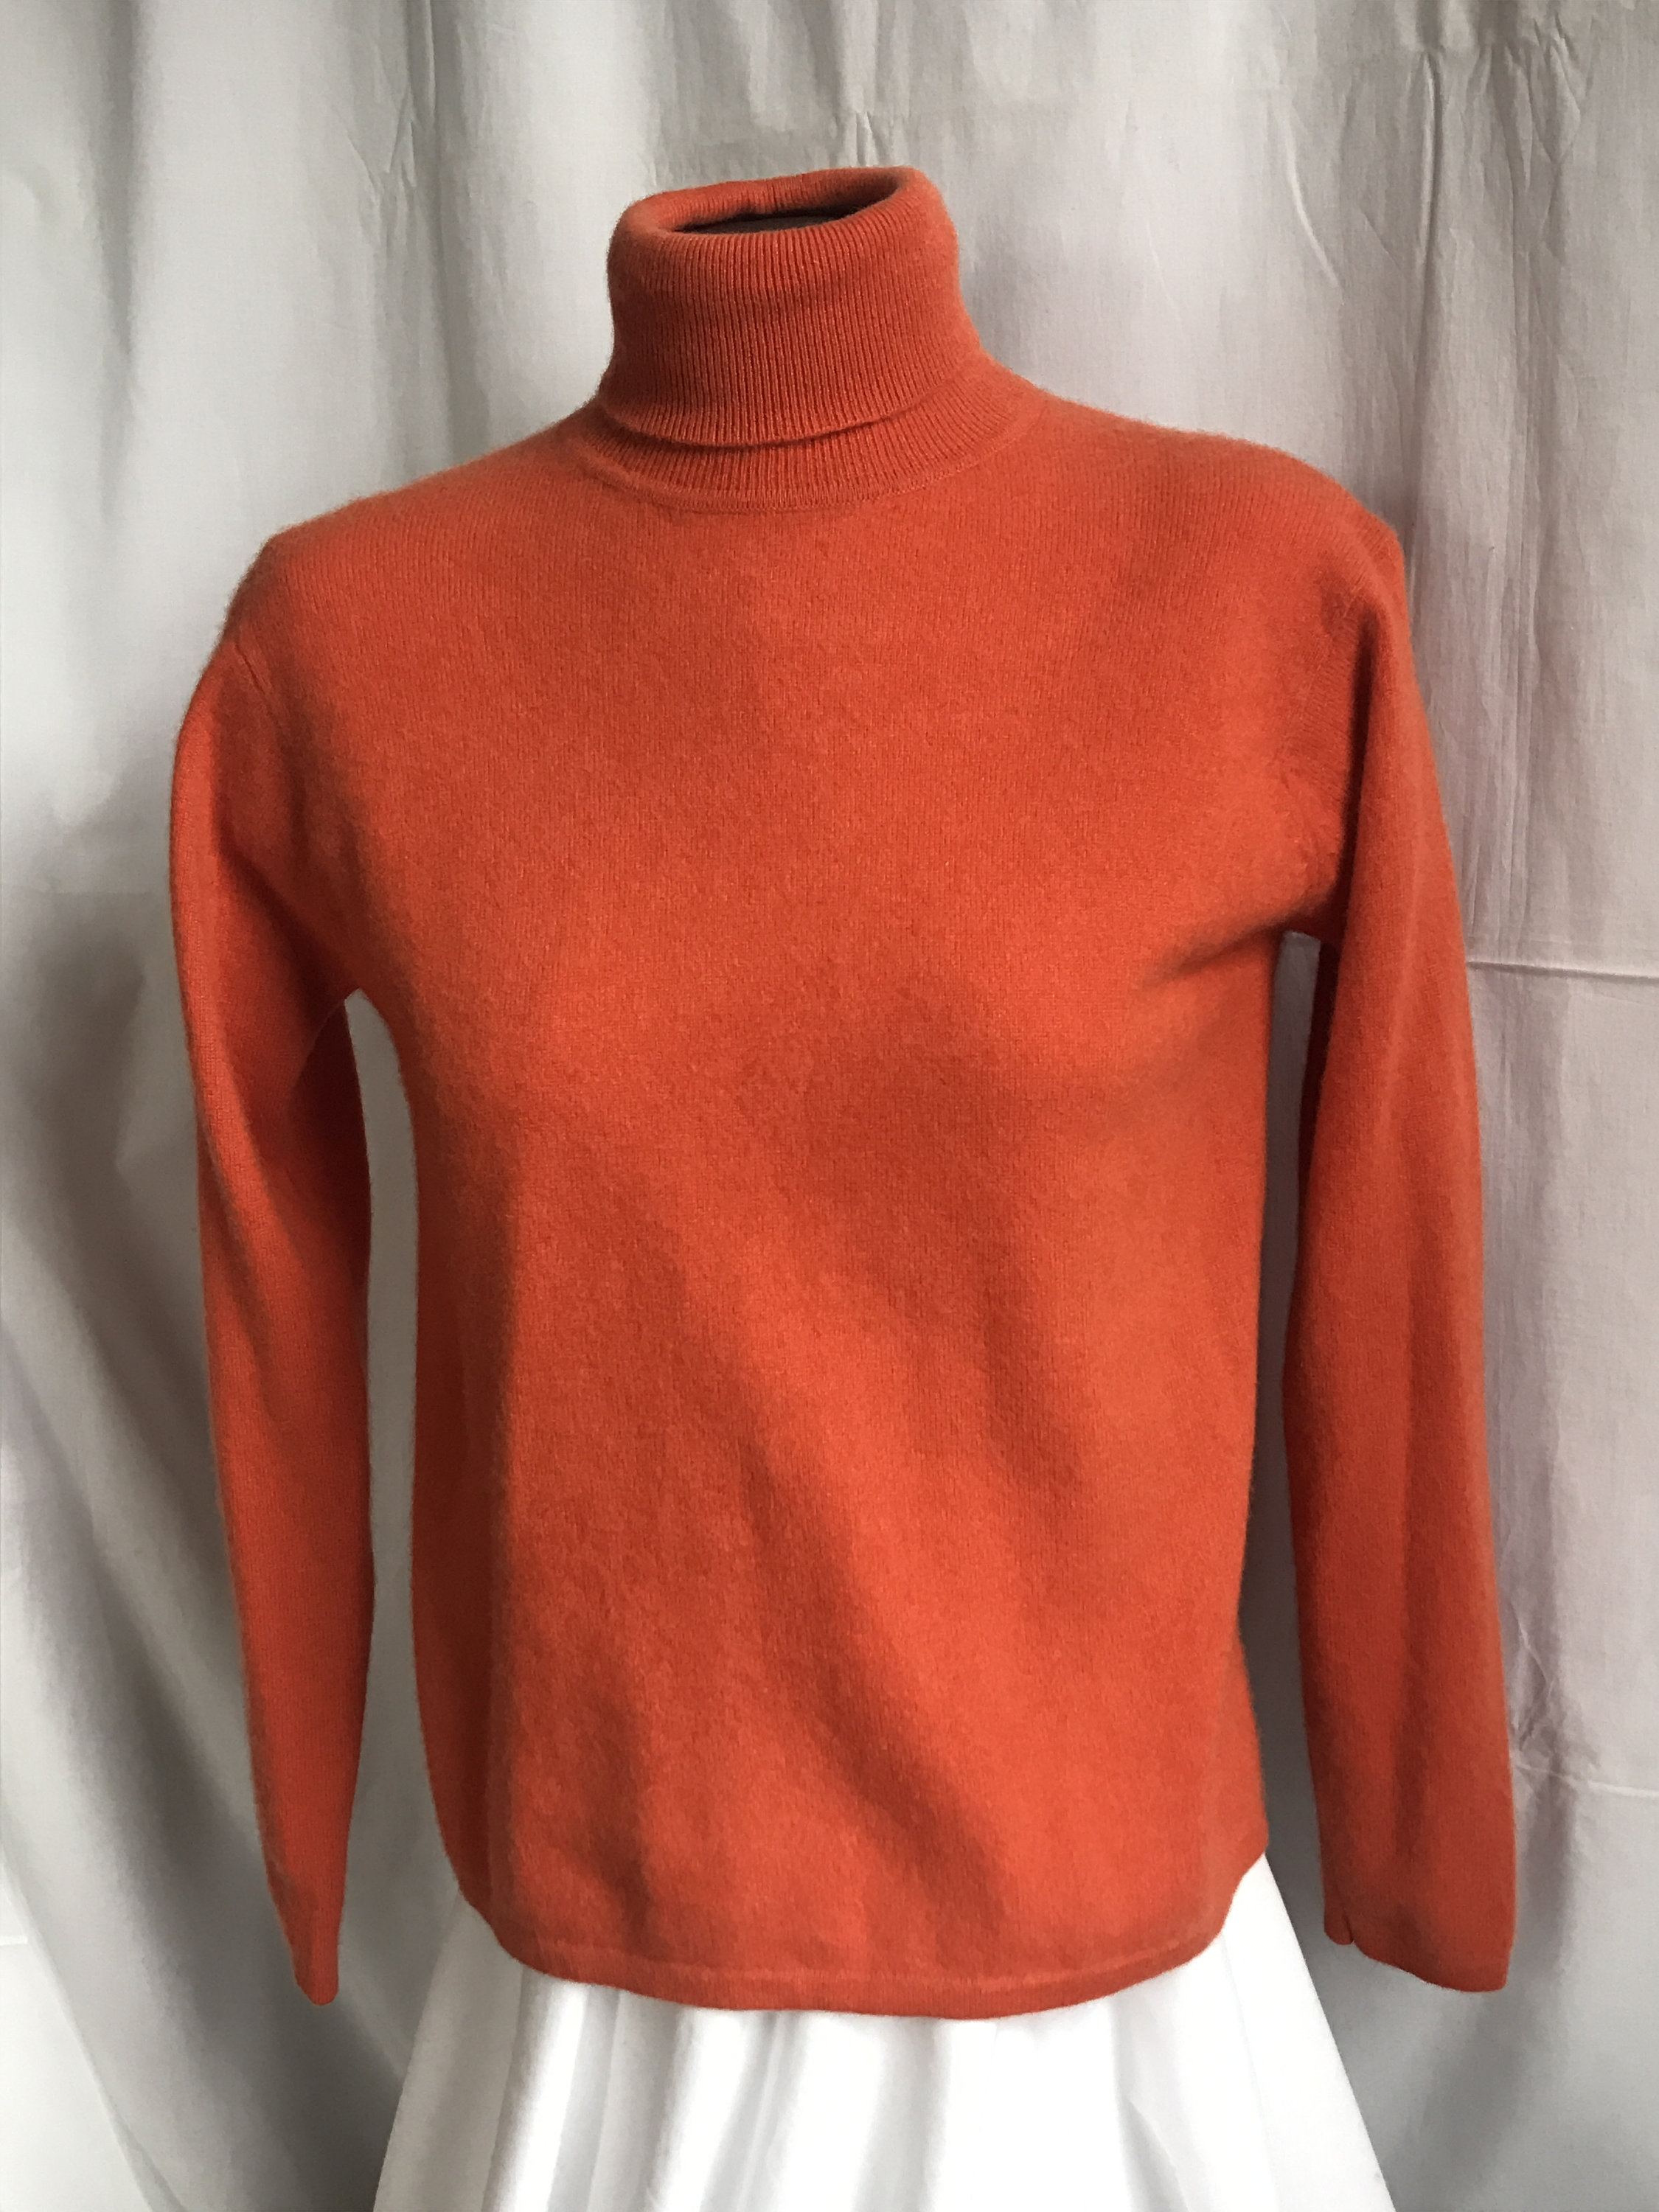 Simple orange cashmere turtleneck with two cashmere dots. | Etsy